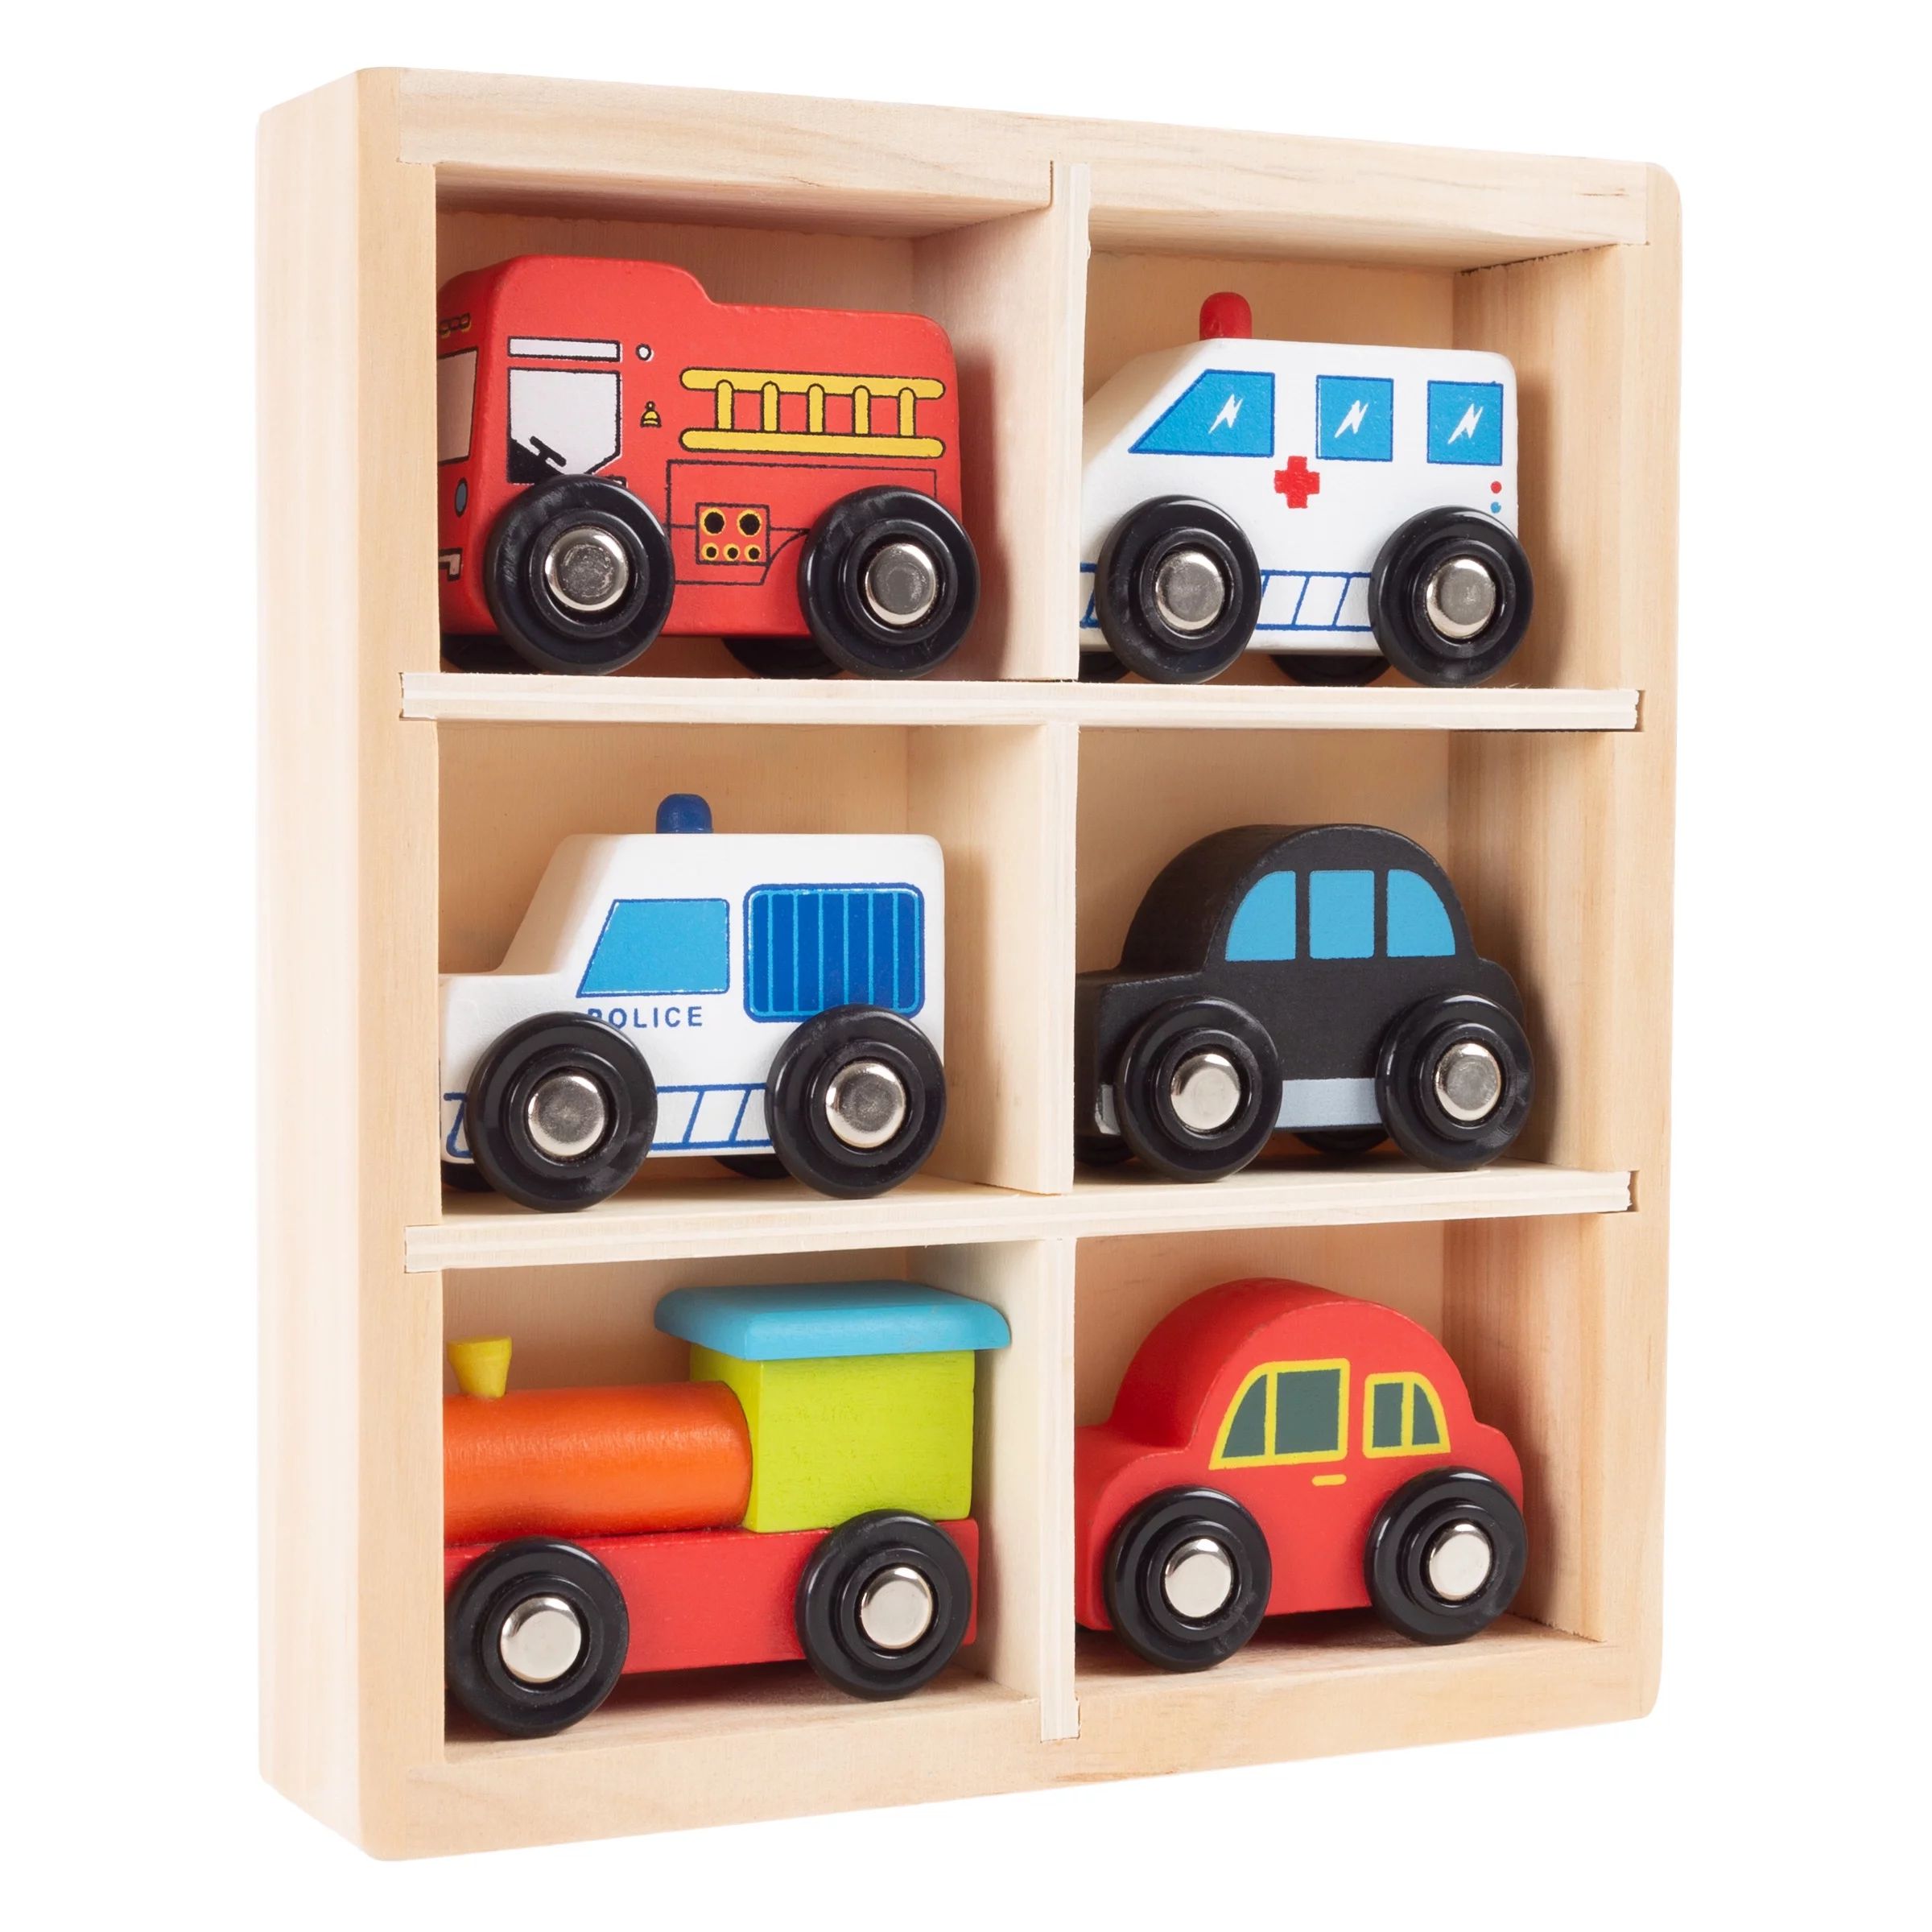 Wooden Car PlaySet-6-Piece Mini Toy Vehicle Set by Hey! Play! | Walmart (US)